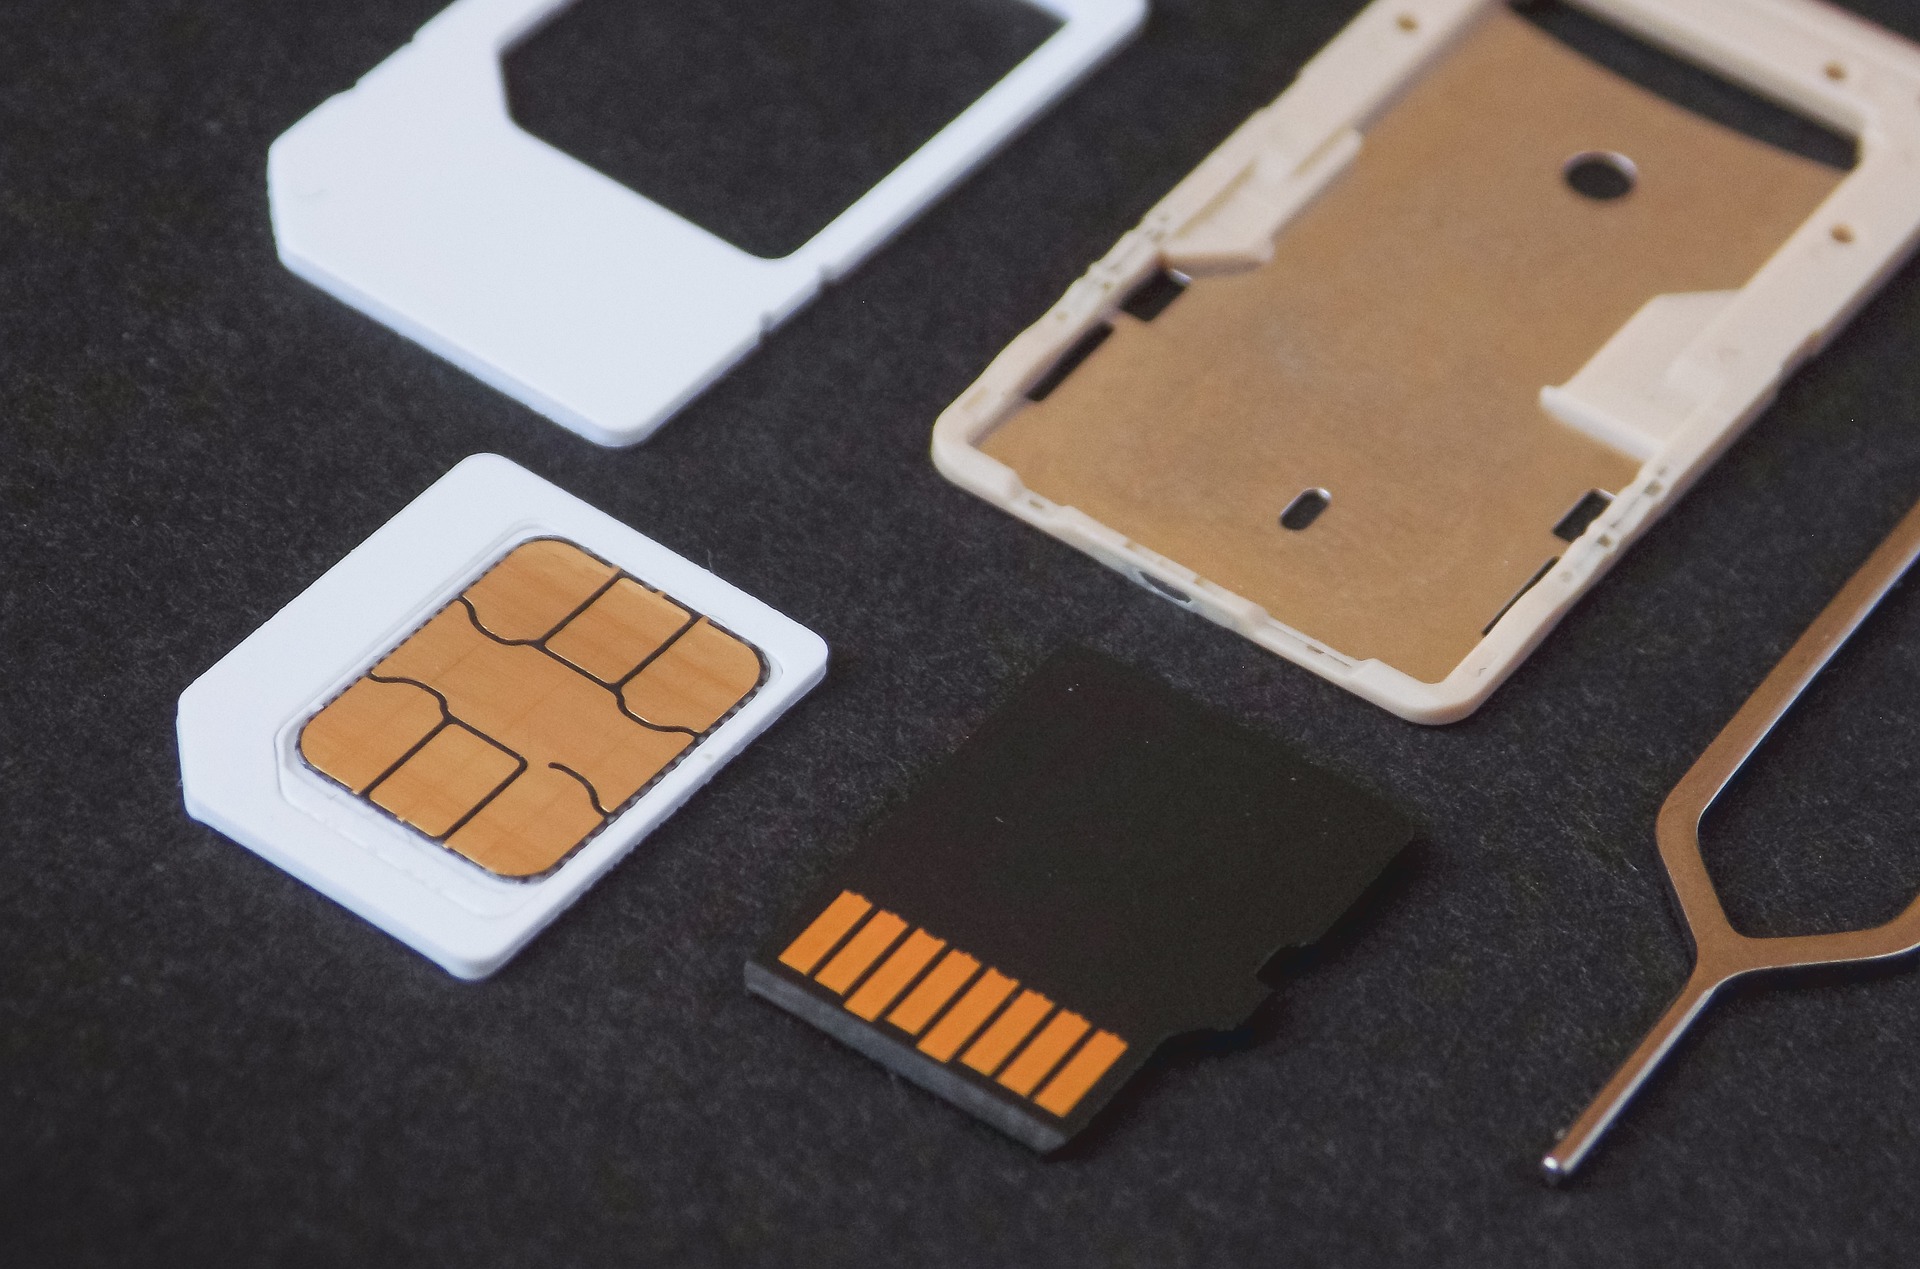 Read All About eSIM, the Cutting Edge Tech That’s Set to Replace the SIM Card